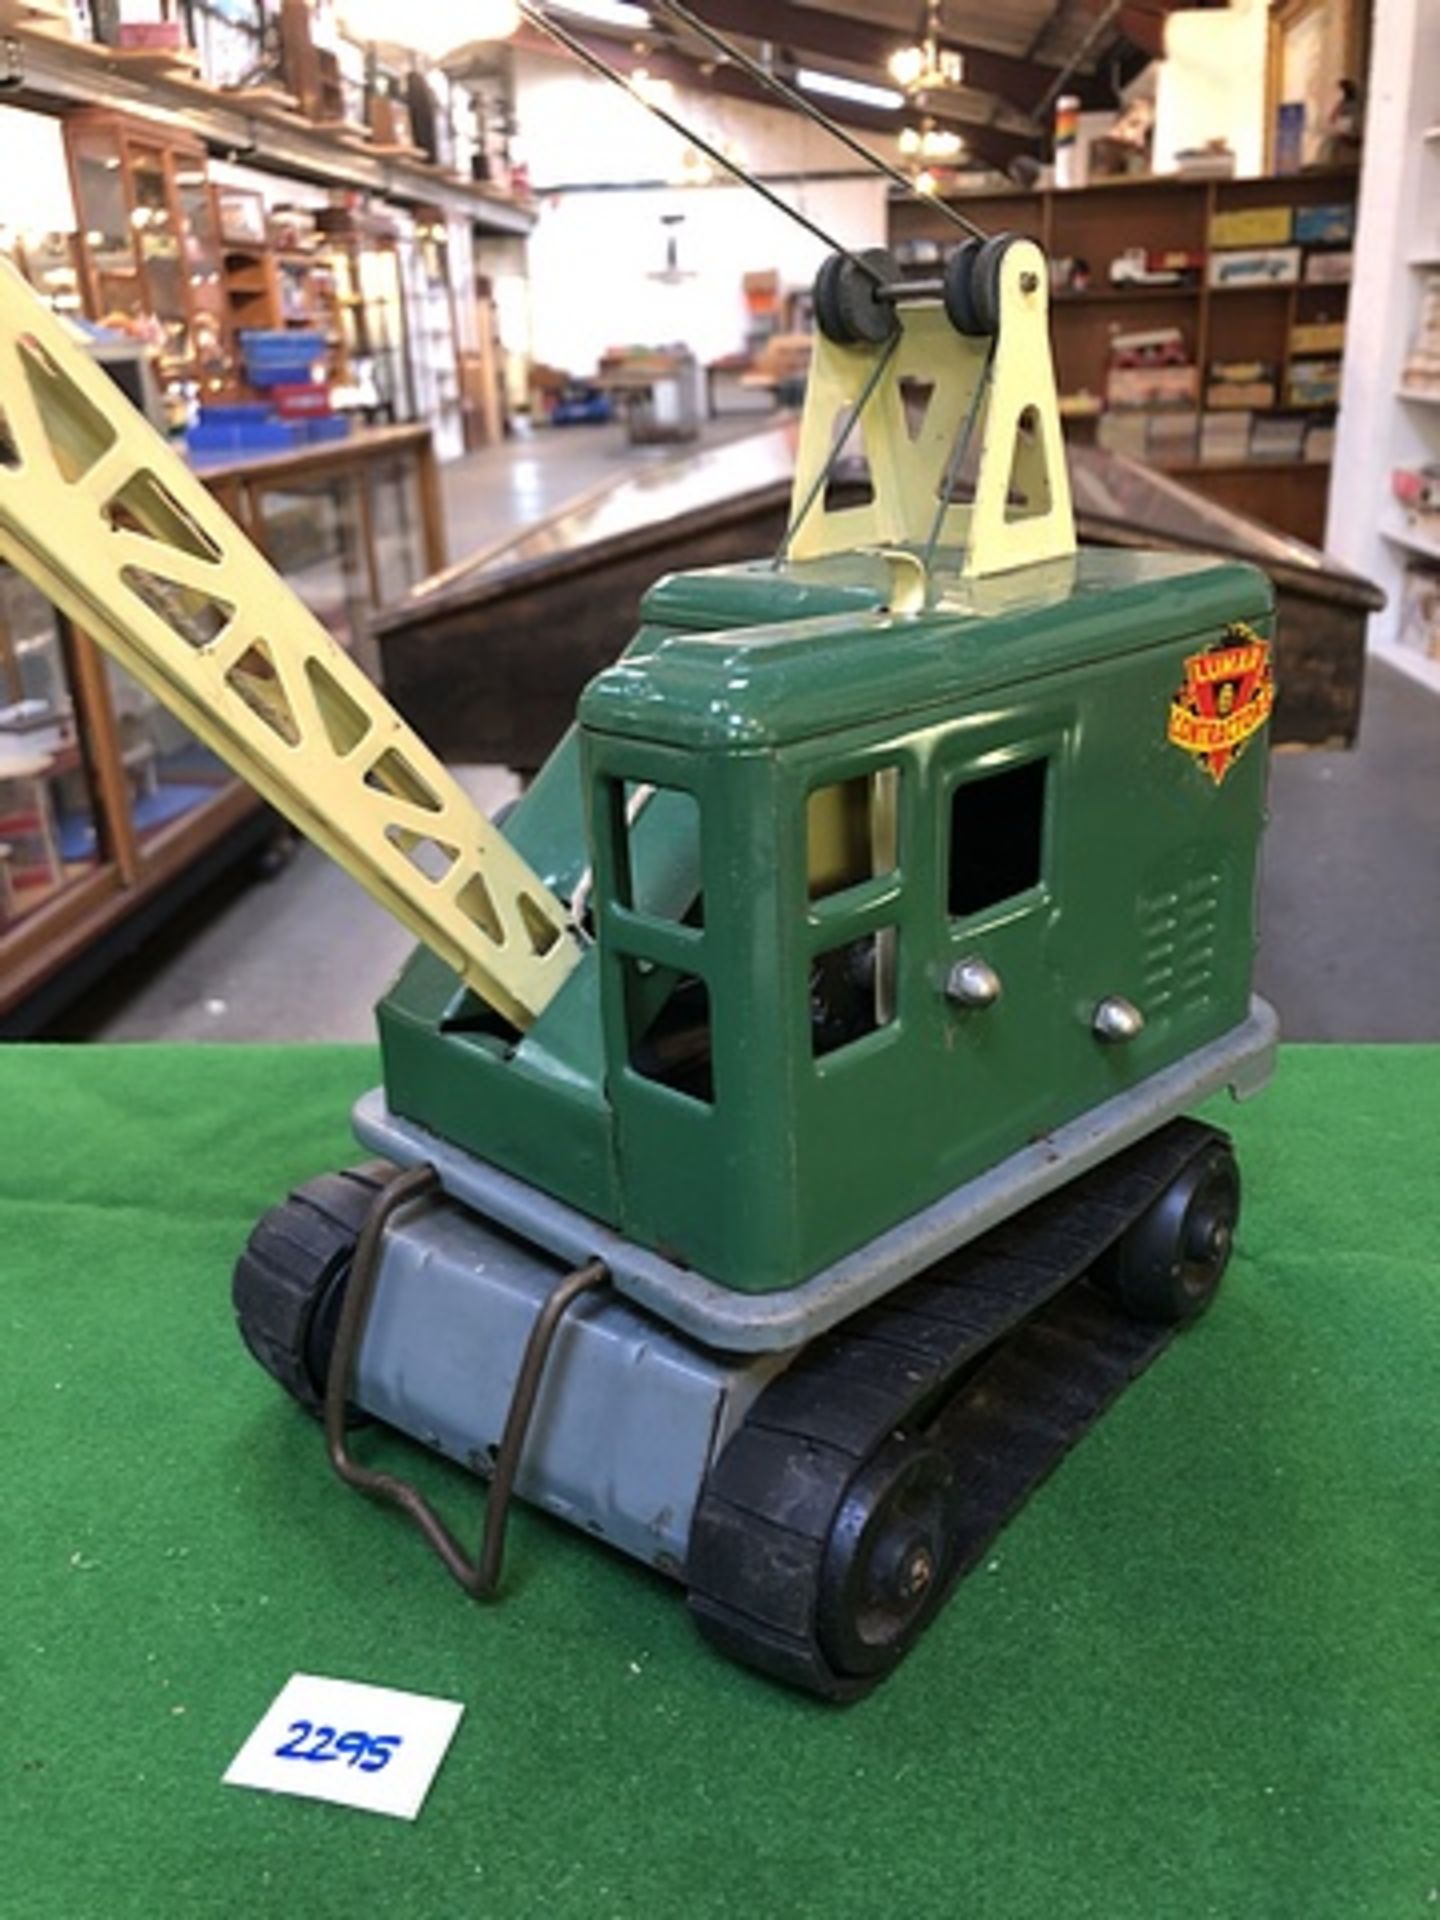 Marx Toys 1950s Marx Lumar Contractors Mobile Crane Green And Yellow Pressed Steel 1950s - Image 2 of 2